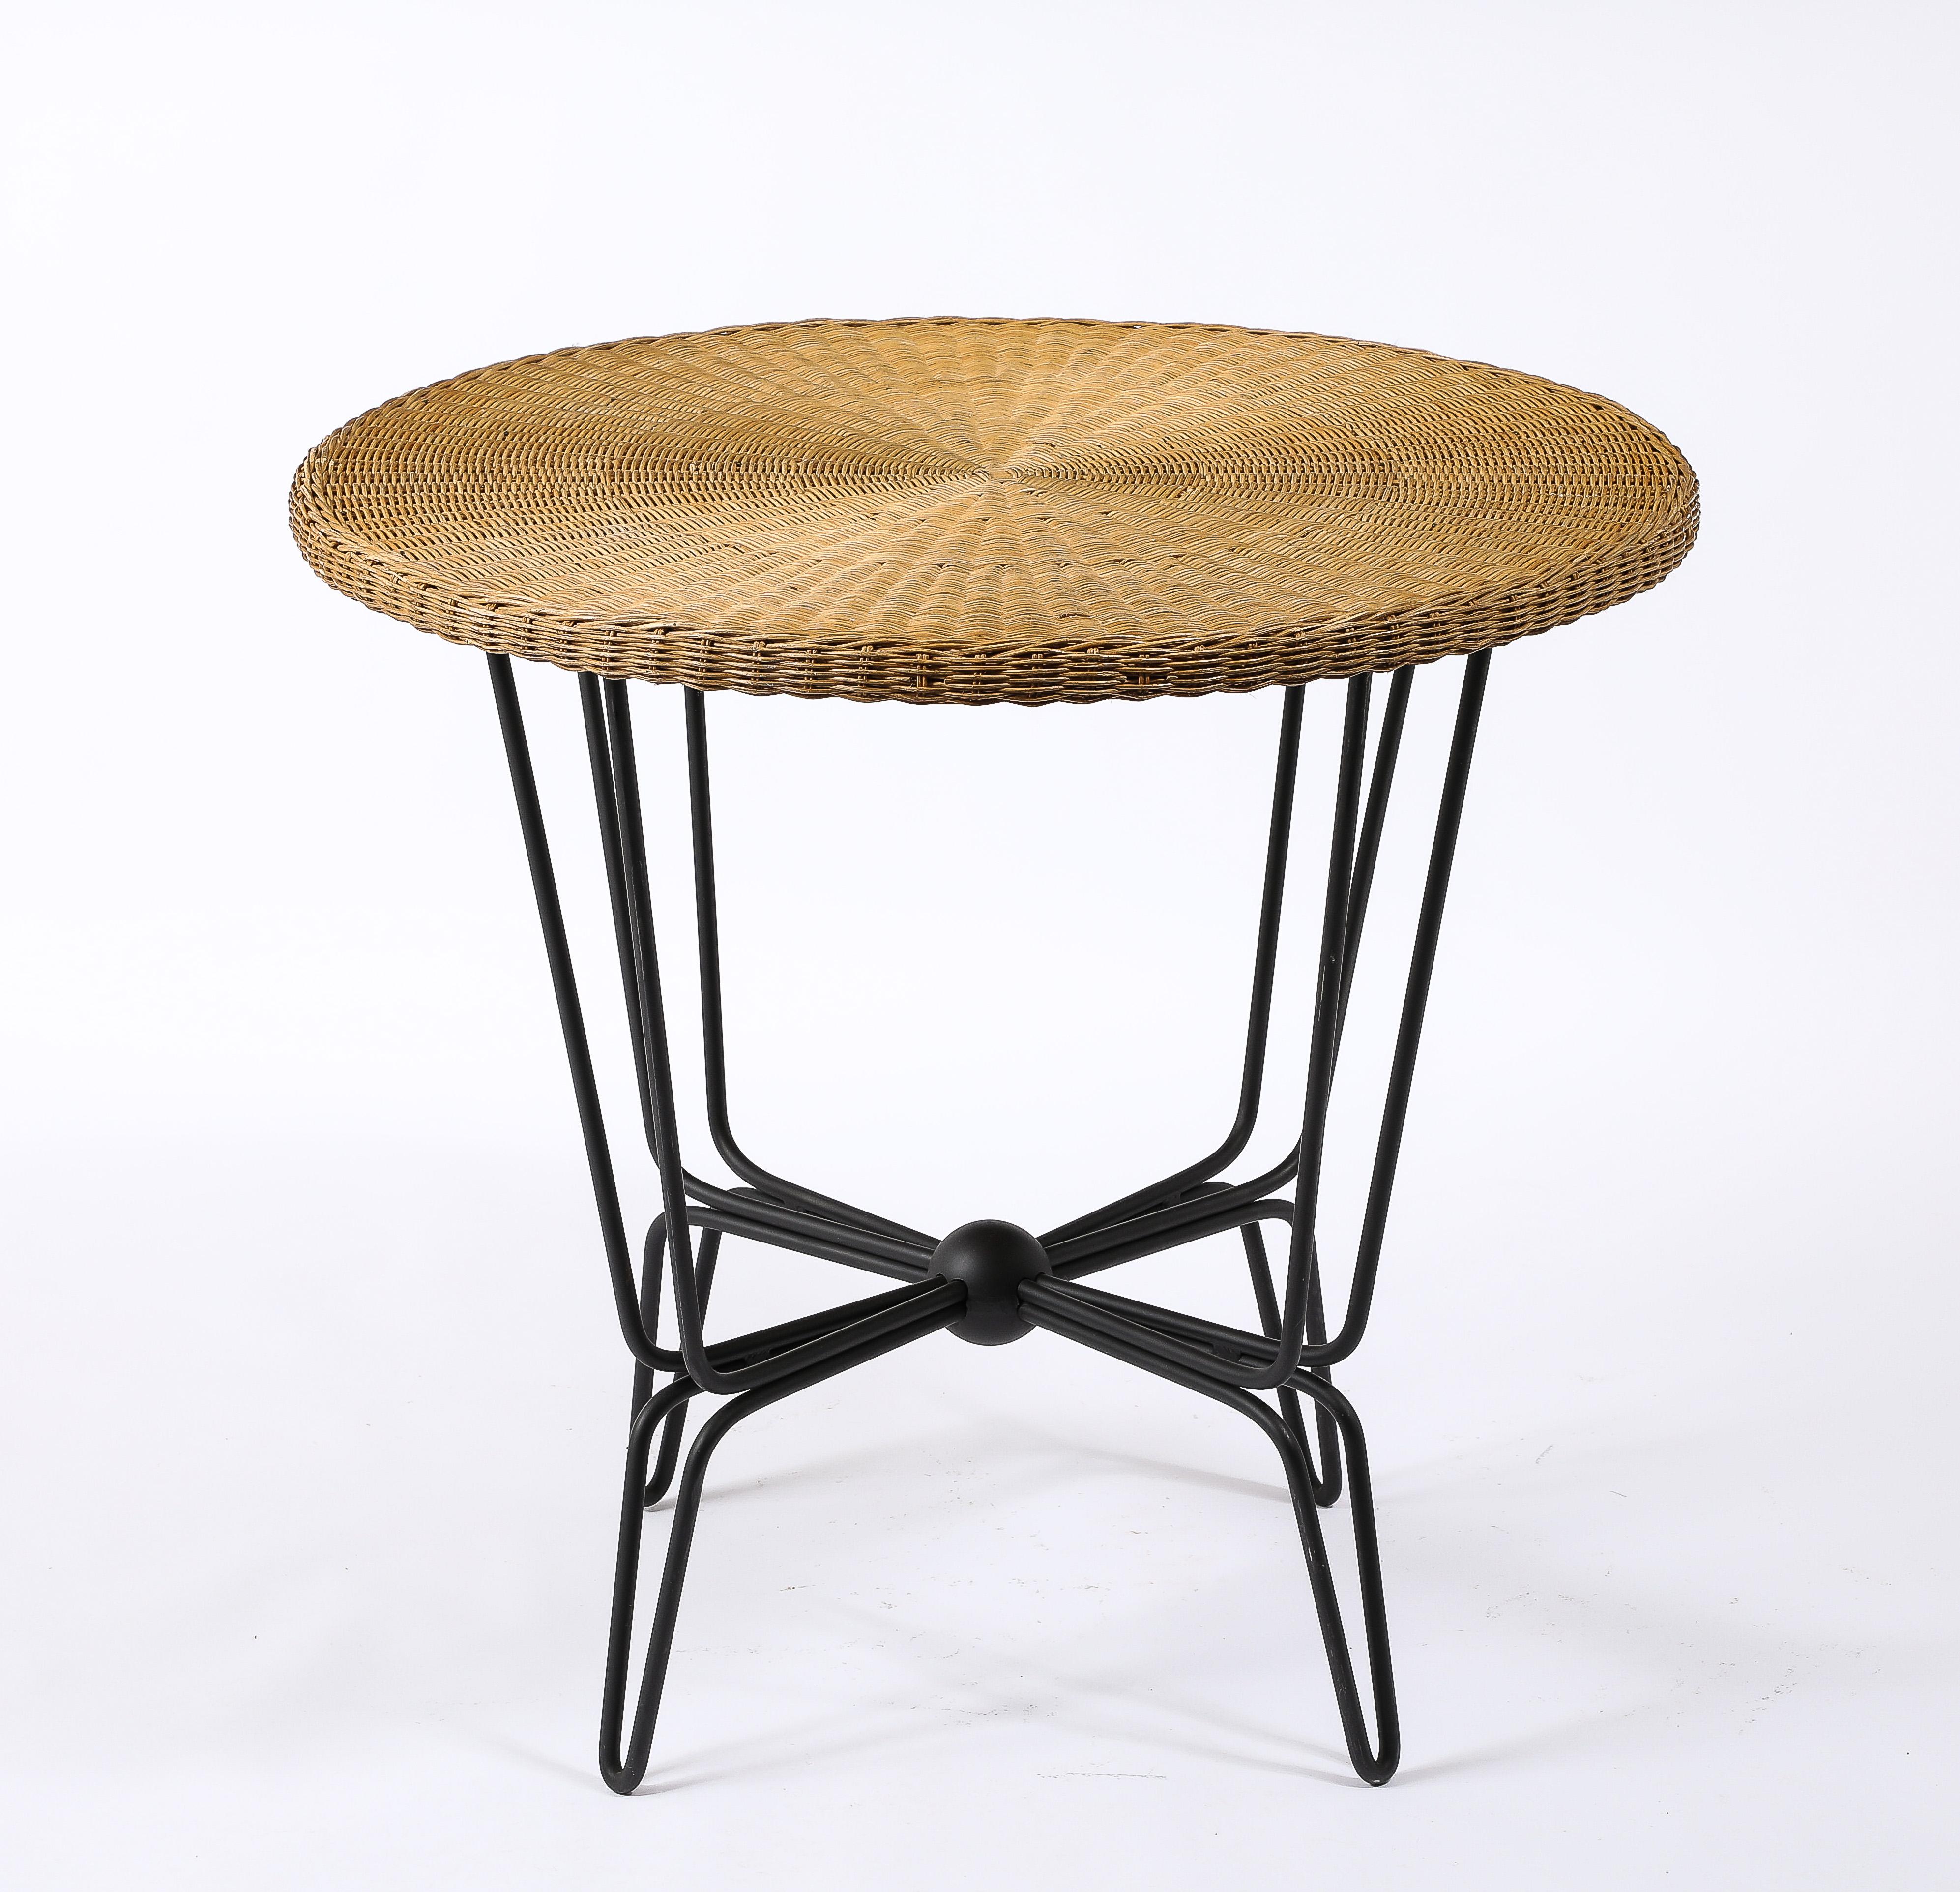 Wicker and wrought iron table by Mathieu mategot. Multi layered rod base with all the rods converging in a central sphere. Finished in a gunmetal patin